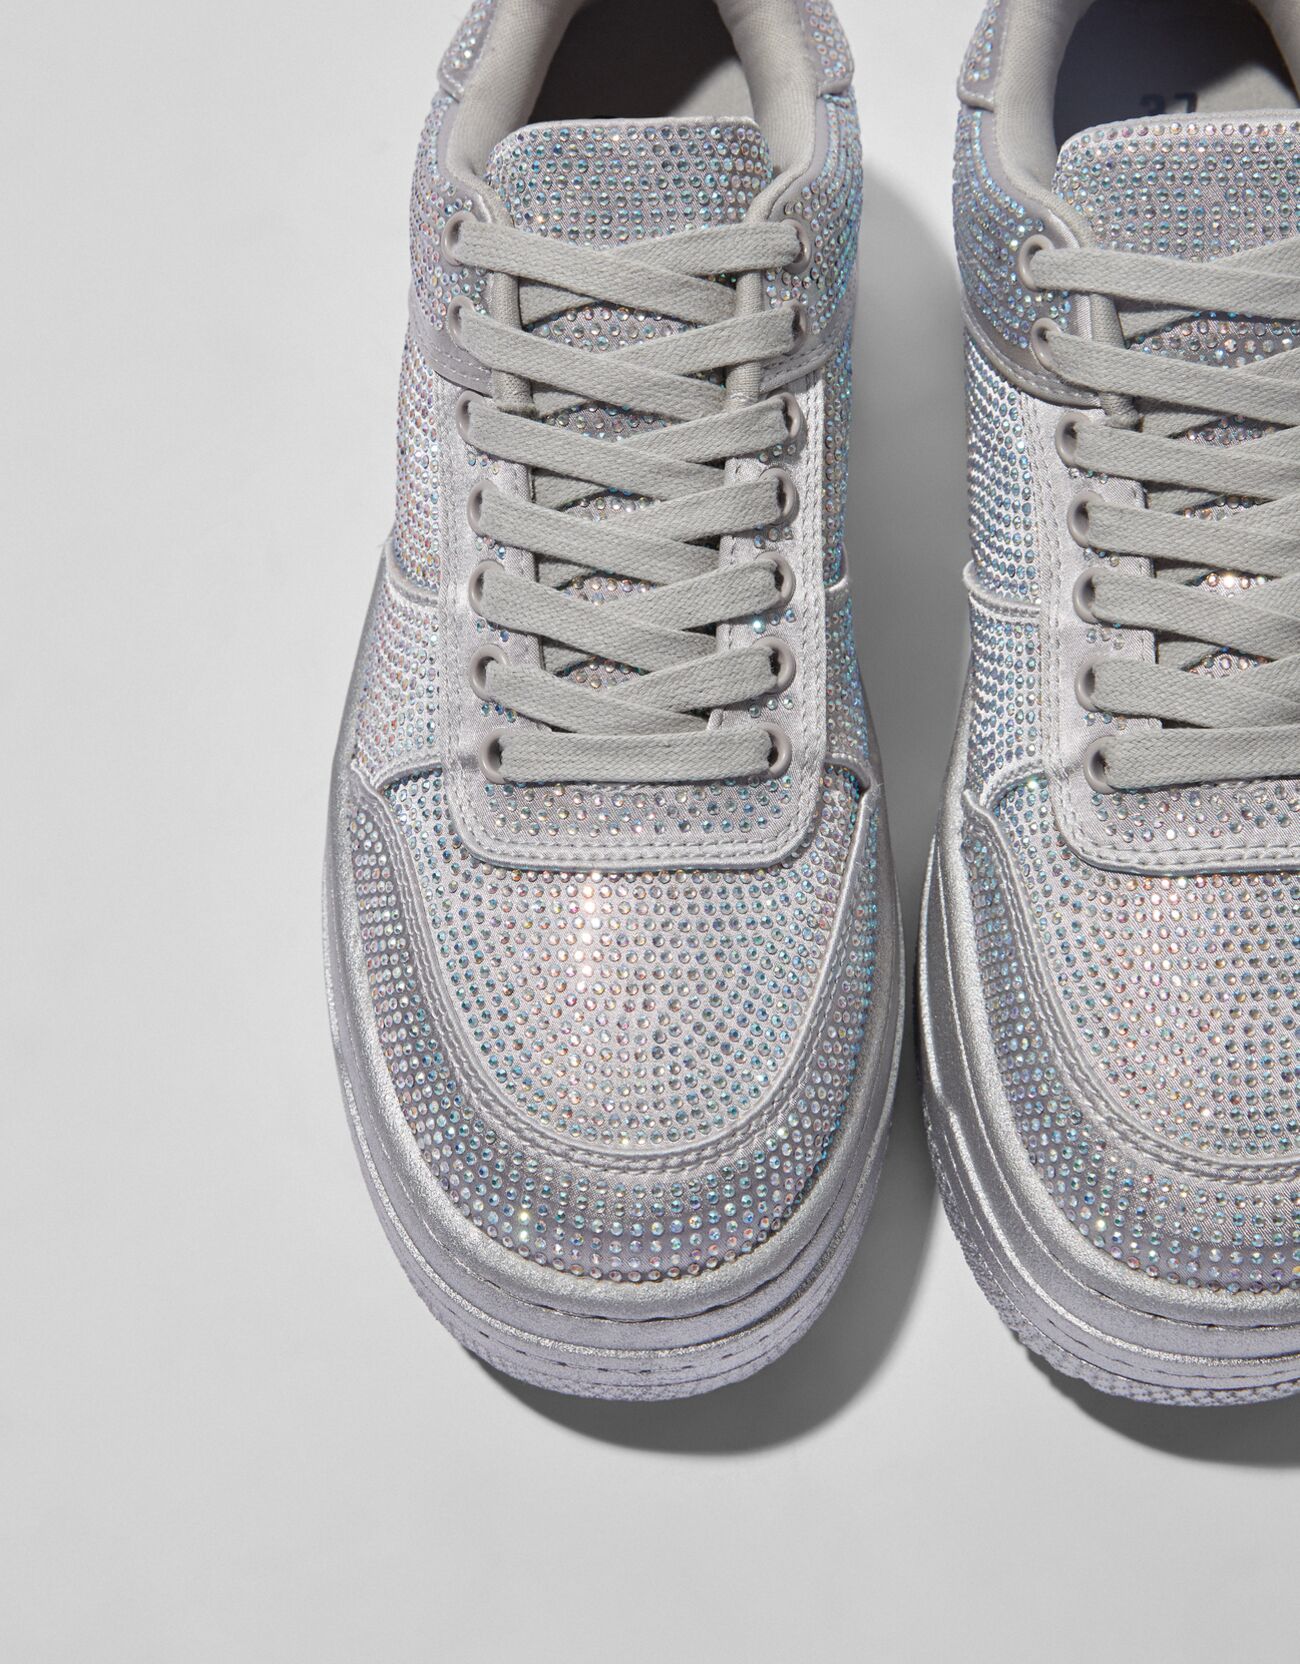 Platform sneakers with glitter details.